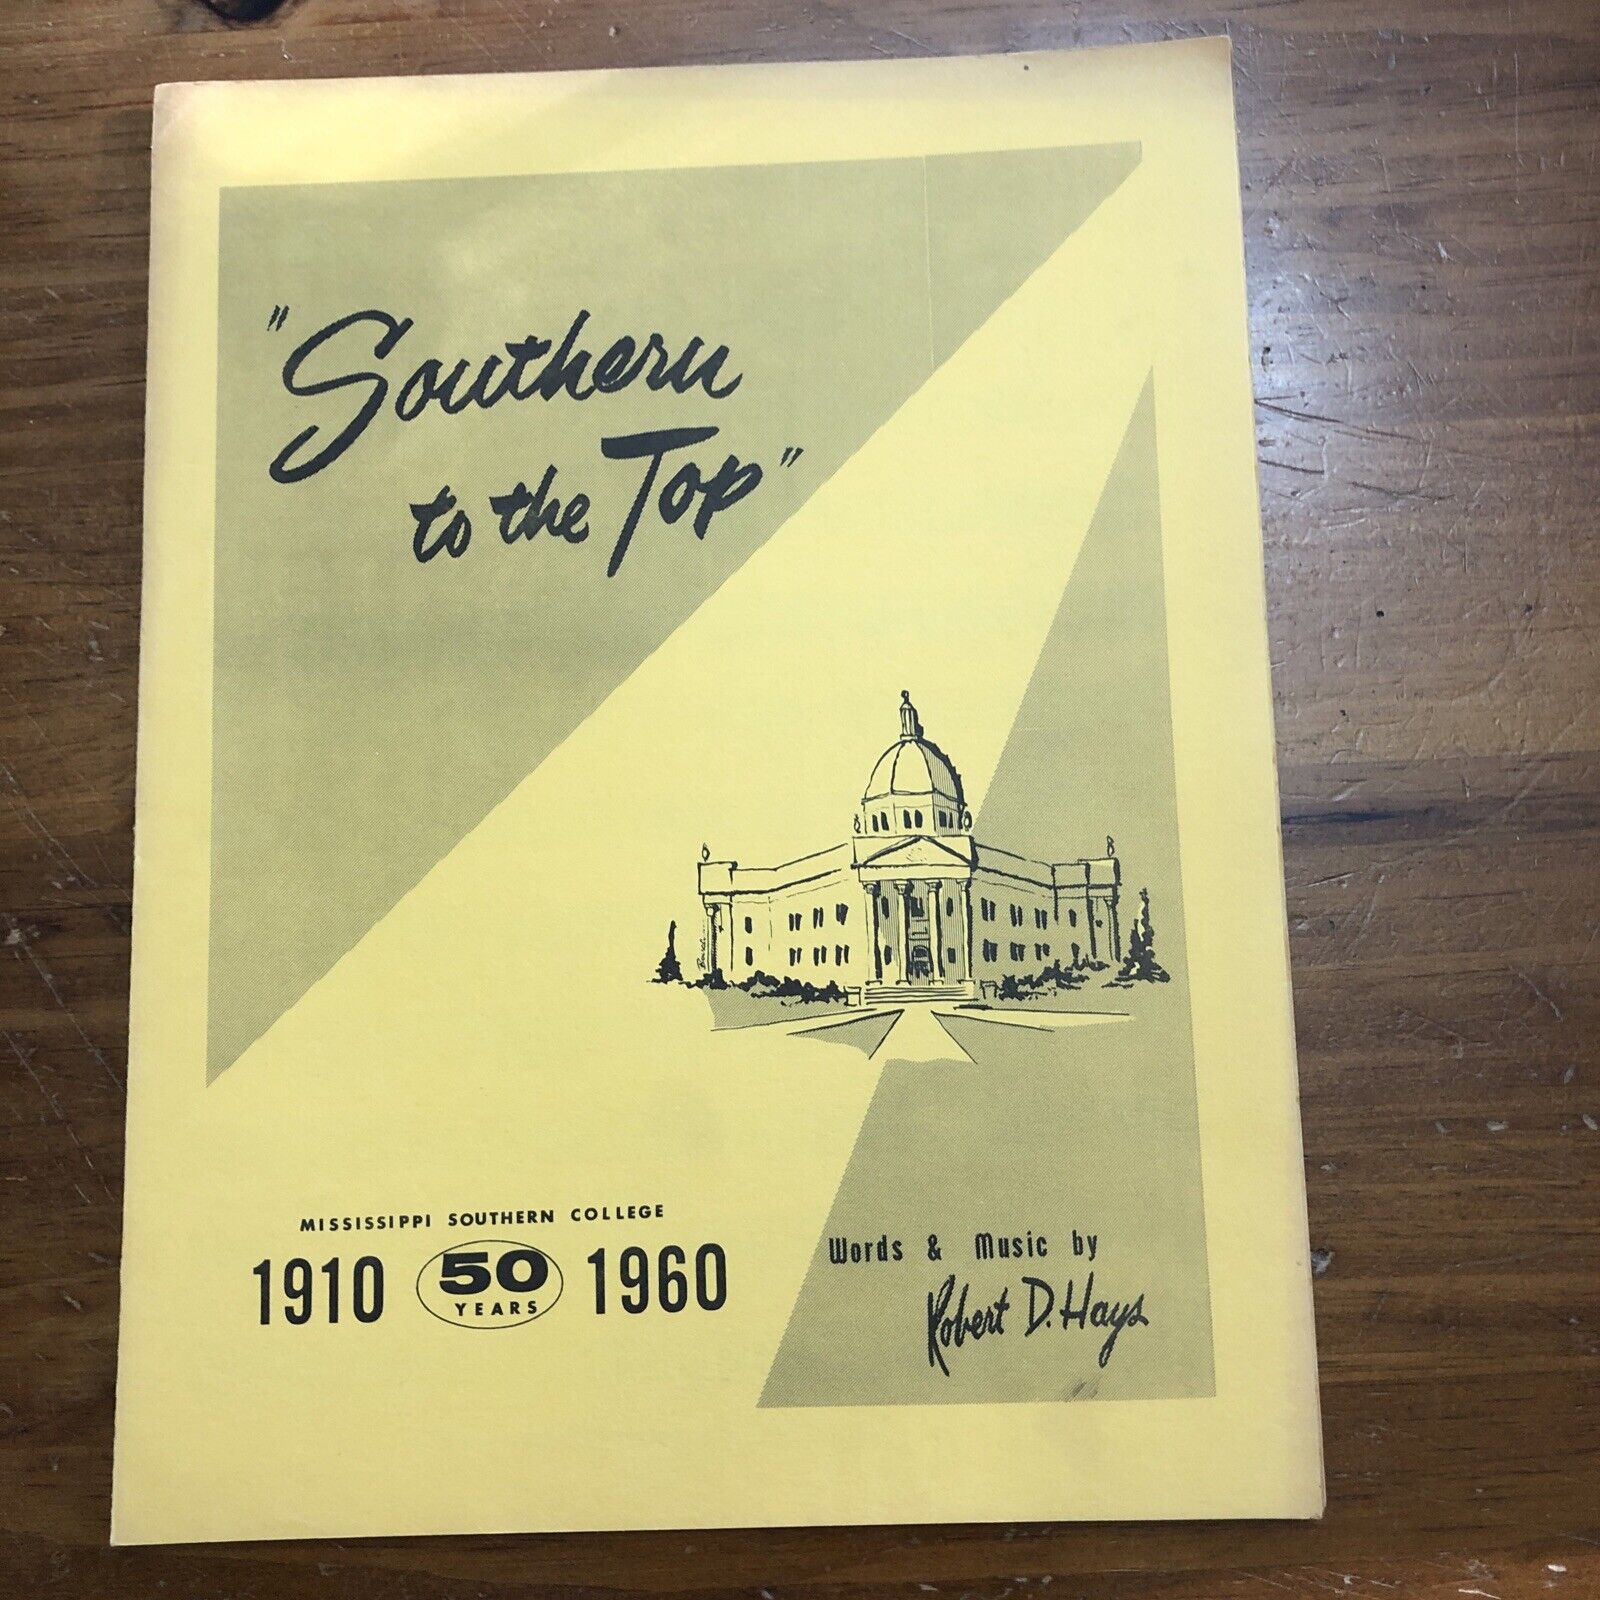 1960 Sheet Music “Southern To The Top” Mississippi Southern College Robert Hayes